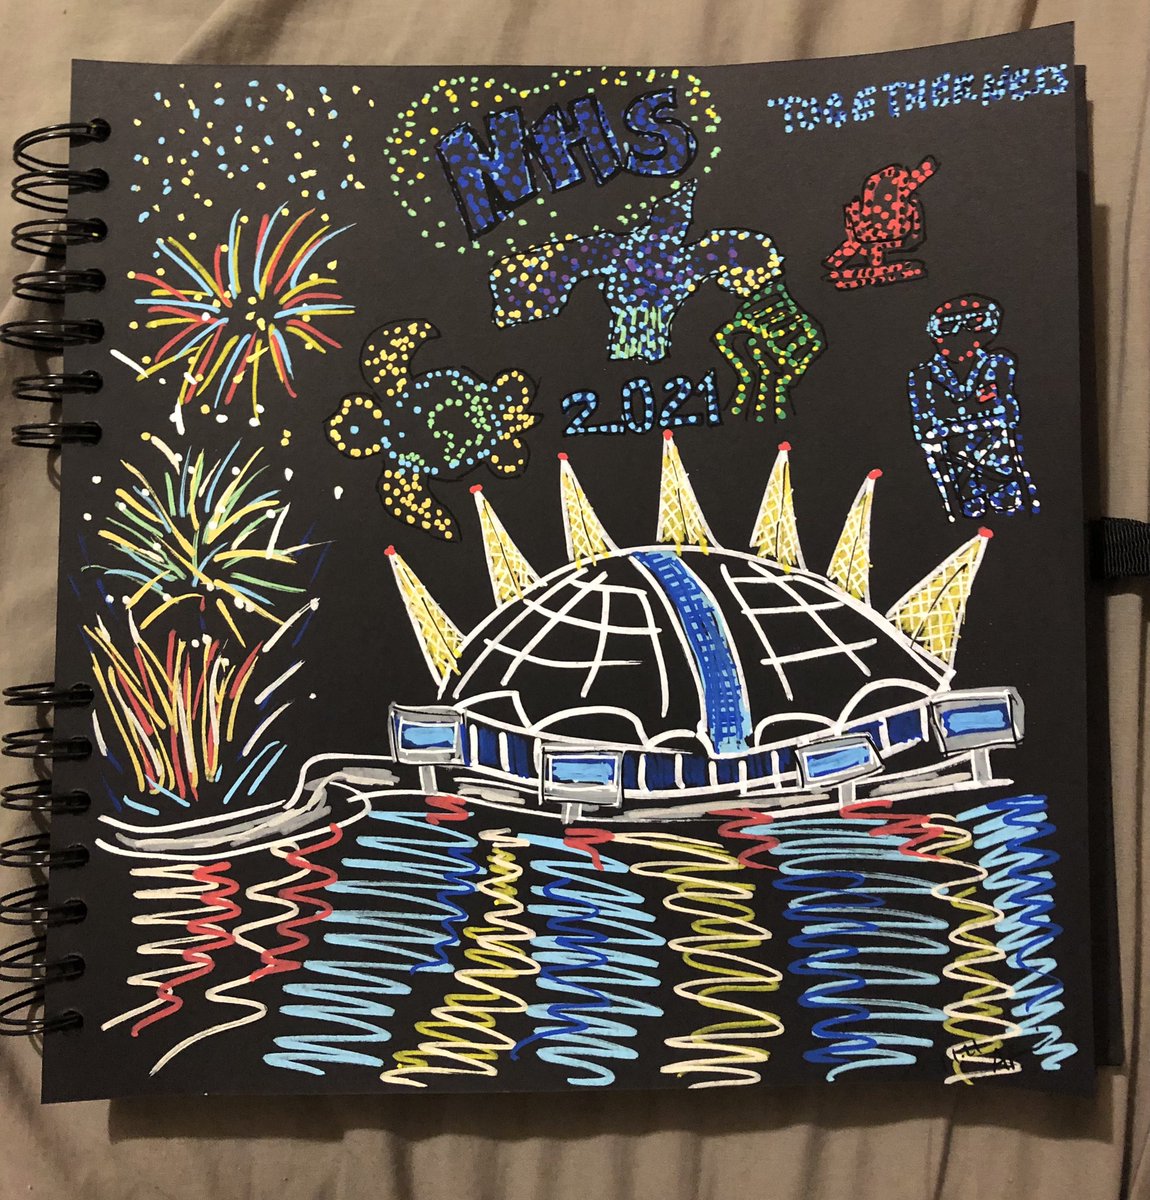 Well, I loved the fireworks and drones display 🤷🏾‍♀️🎆🎇#londonfireworks #2021 #togetherness #sketchbook #pens #TrinityBuoyWharf #O2Arena #GreenwichPeninsula #RiverThames #drones